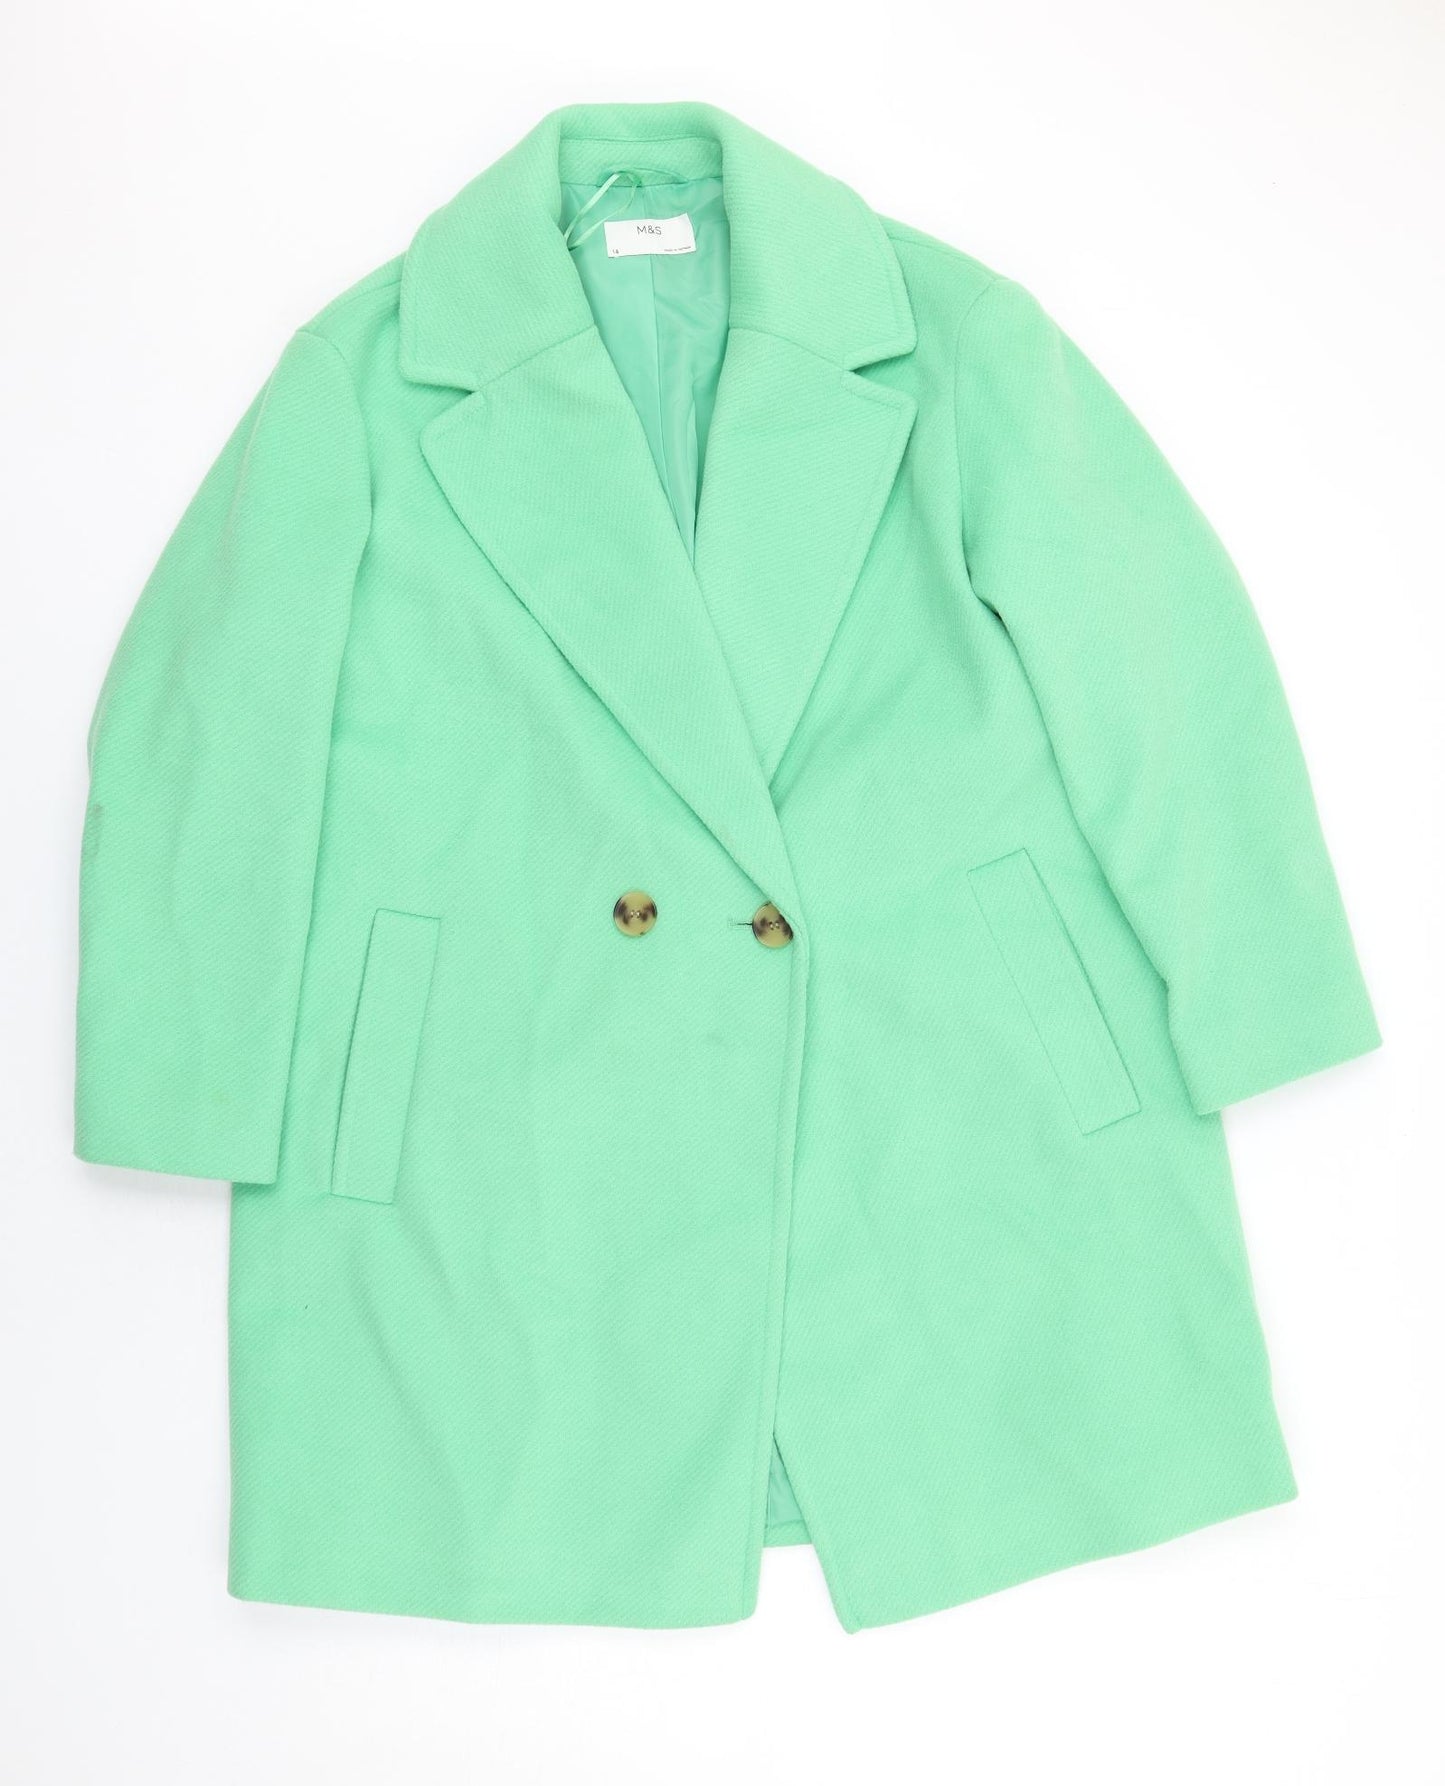 Marks and Spencer Womens Green Overcoat Coat Size 14 Button